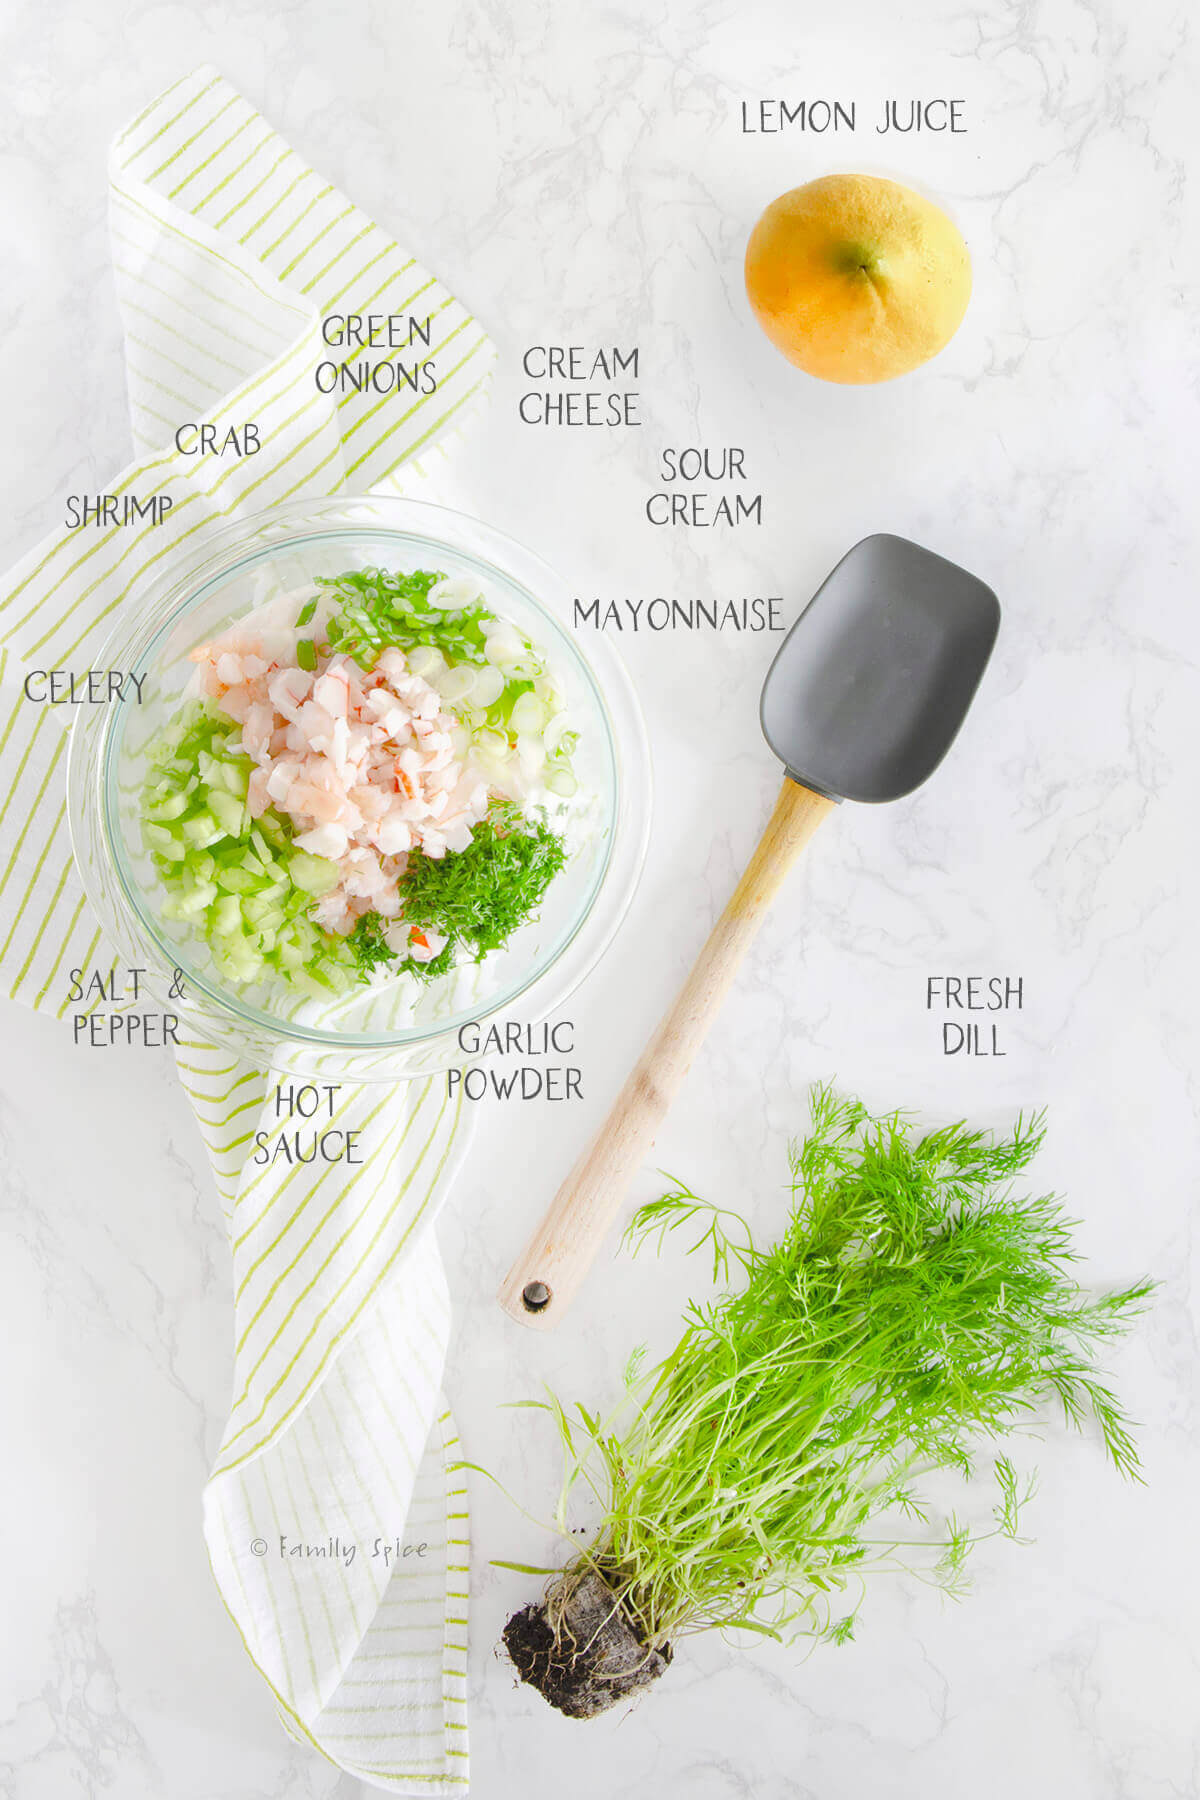 Ingredients needed and labeled to make shrimp and crab dip in a glass bowl with a lemon, dill plant and rubber spatula next to it